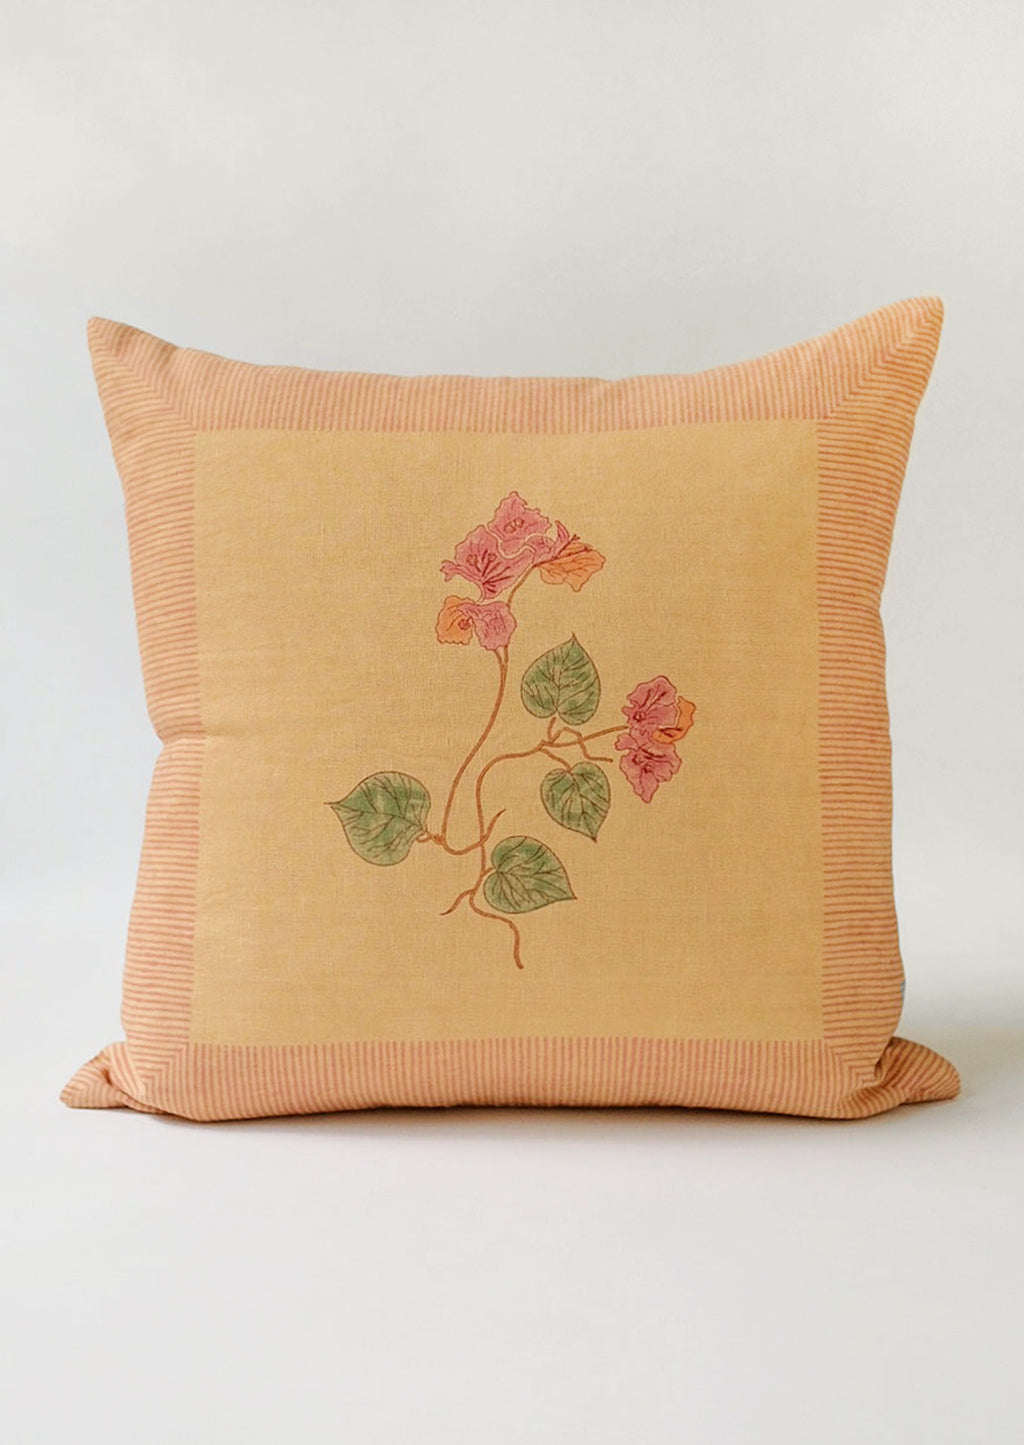 1: A block printed linen pillow in sand with pink bougainvillea print.